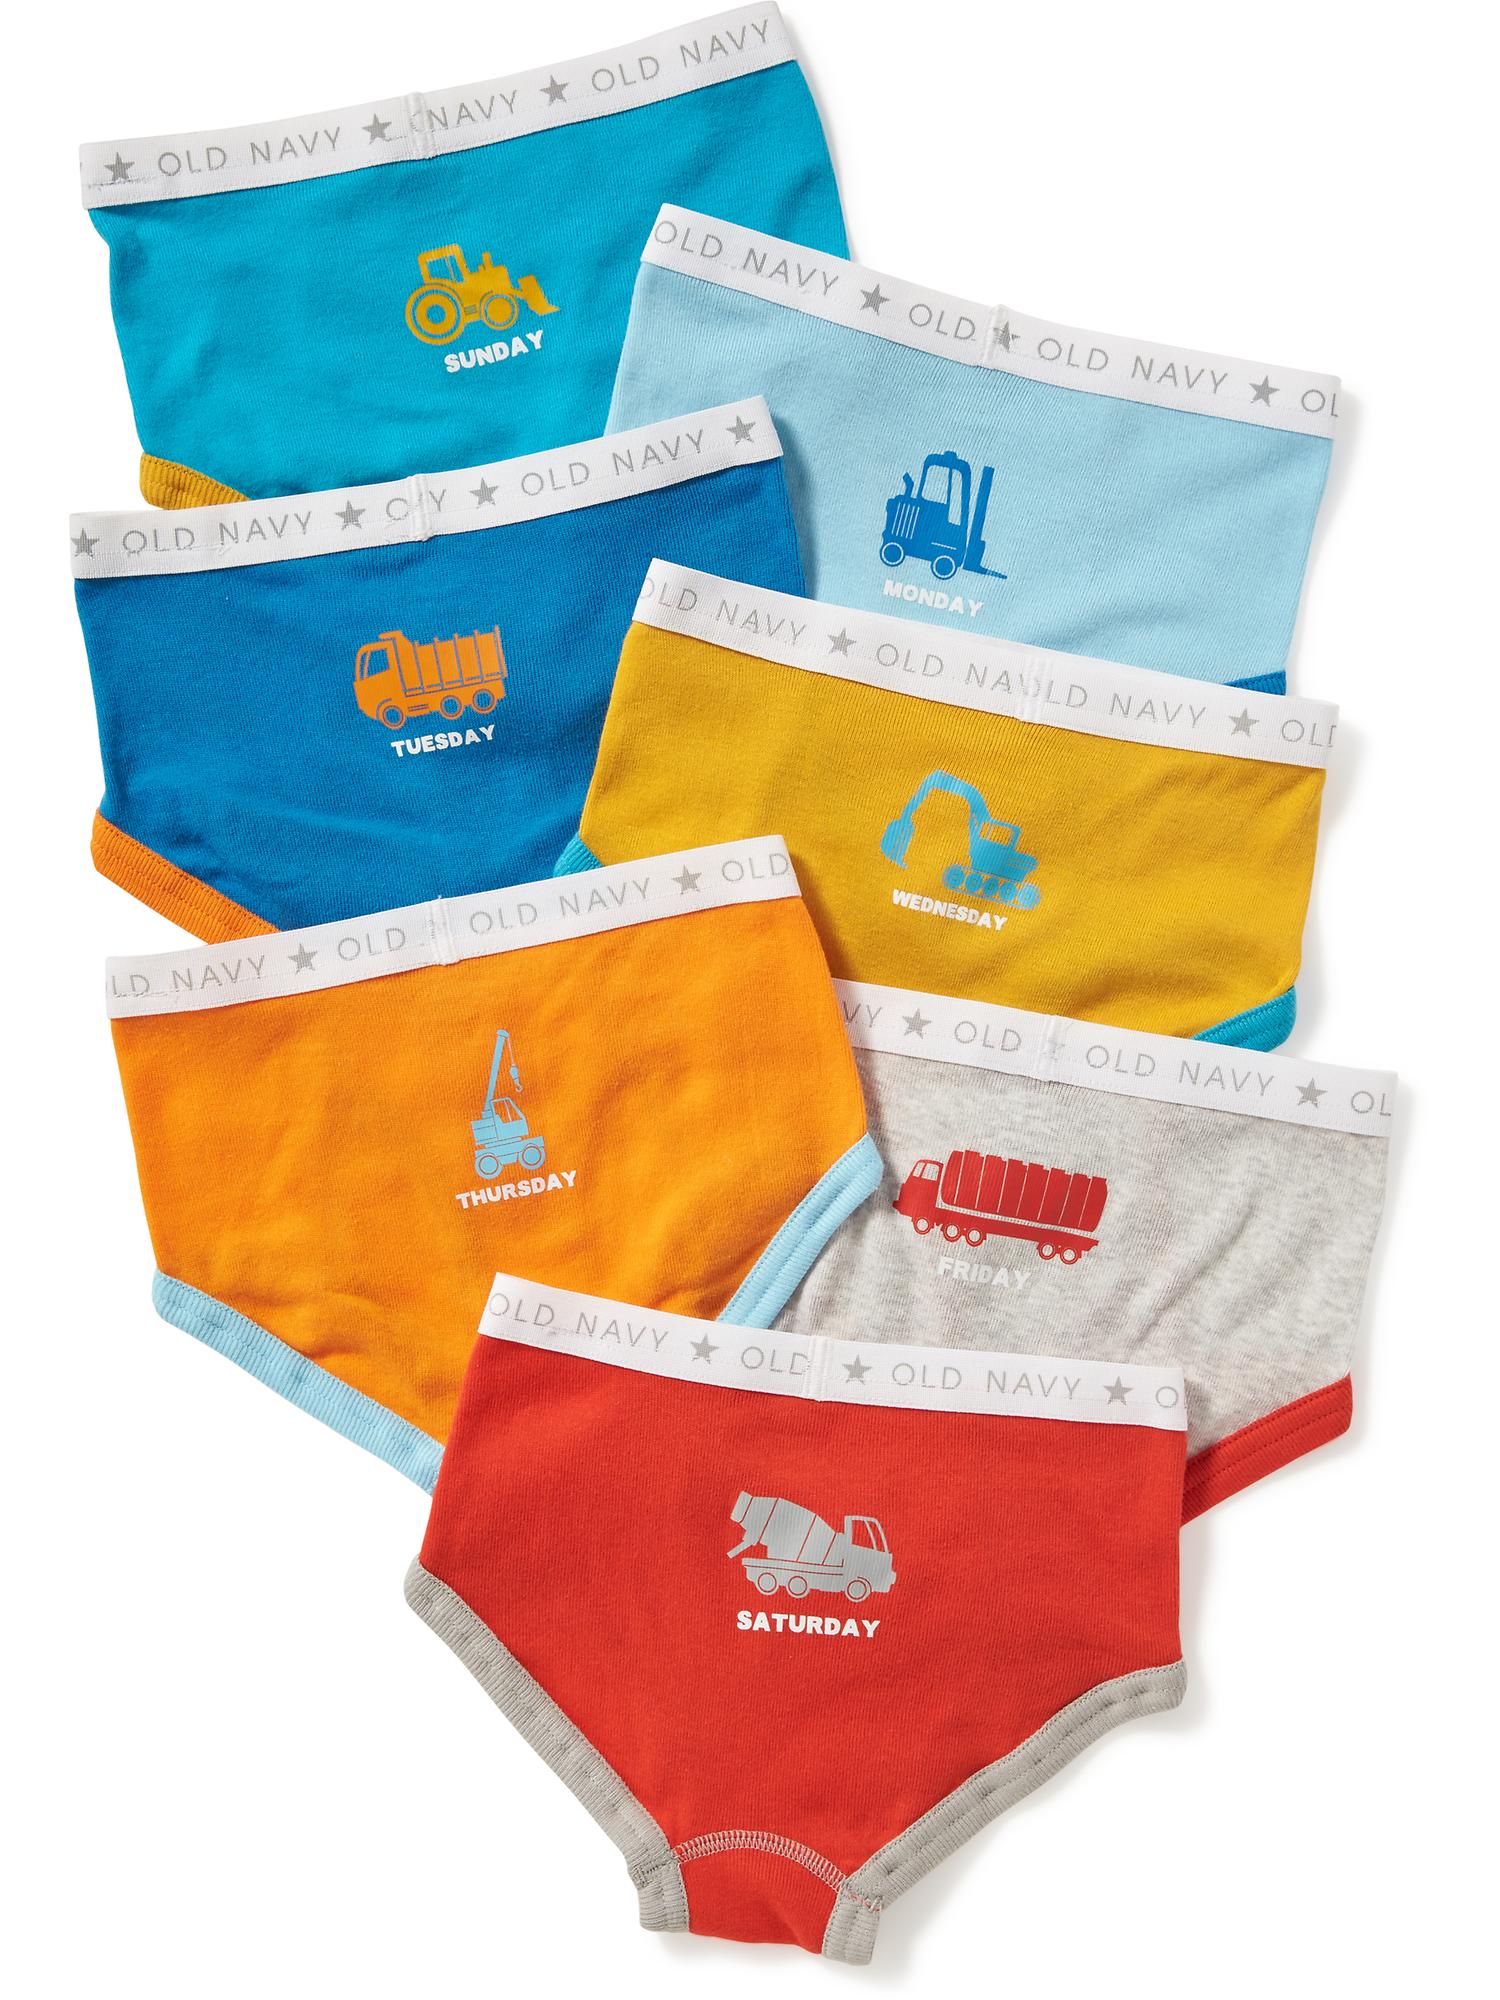 Old Navy New Toddler Girls 7 Pack Underwear 4T 5T 100% Cotton for